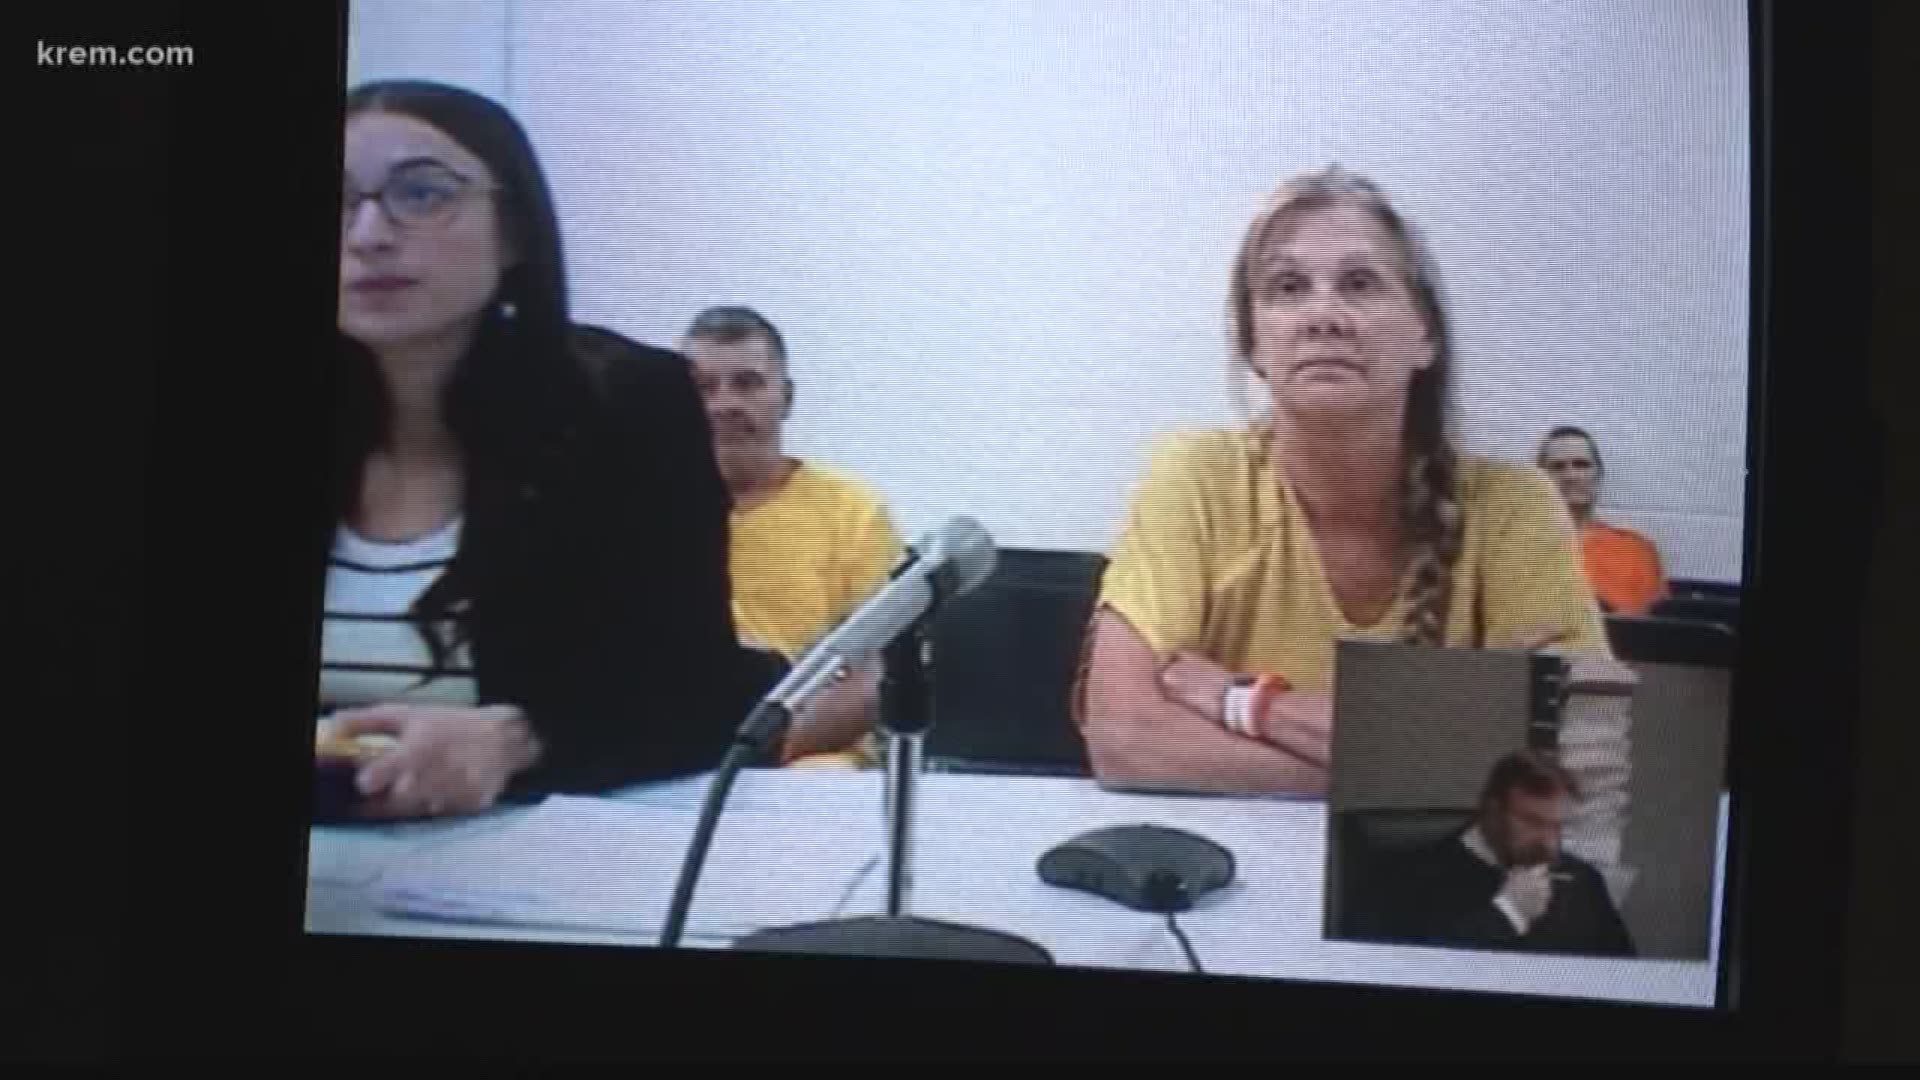 A source confirmed the grand jury will consider murder charges against Lori Isenberg on the condition of anonymity.